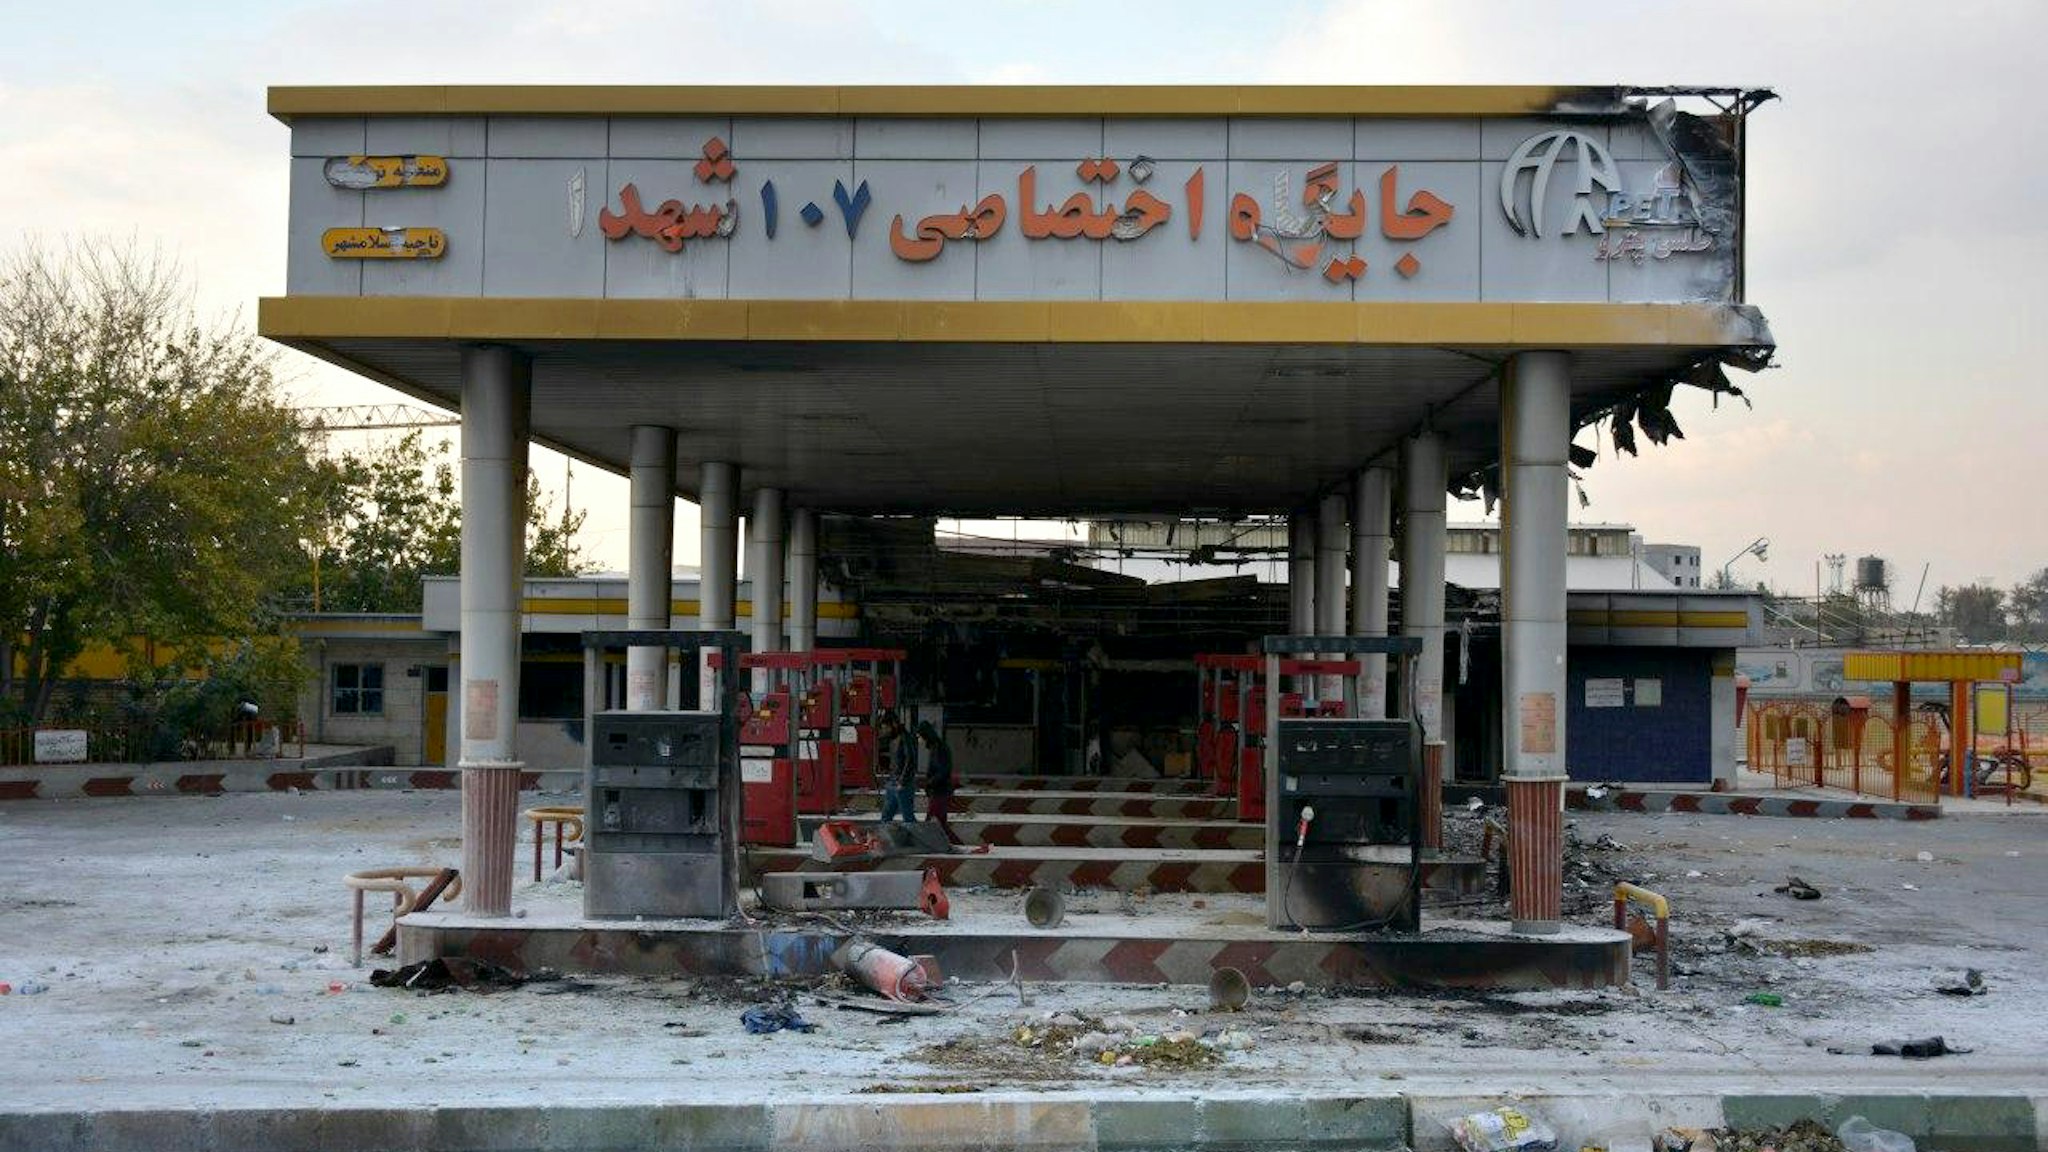 A picture taken on November 17, 2019 shows a scorched gas station that was set ablaze by protesters during a demonstration against a rise in gasoline prices in Eslamshahr, near the Iranian capital of Tehran. - President Hassan Rouhani warned that riot-hit Iran could not allow "insecurity" after two days of unrest killed two people and saw authorities arrest dozens and restrict internet access. Rouhani defended the controversial petrol price hike that triggered the protests -- a project which the government says will finance social welfare spending amid a sharp economic downturn (Photo by - / AFP) (Photo by -/AFP via Getty Images)